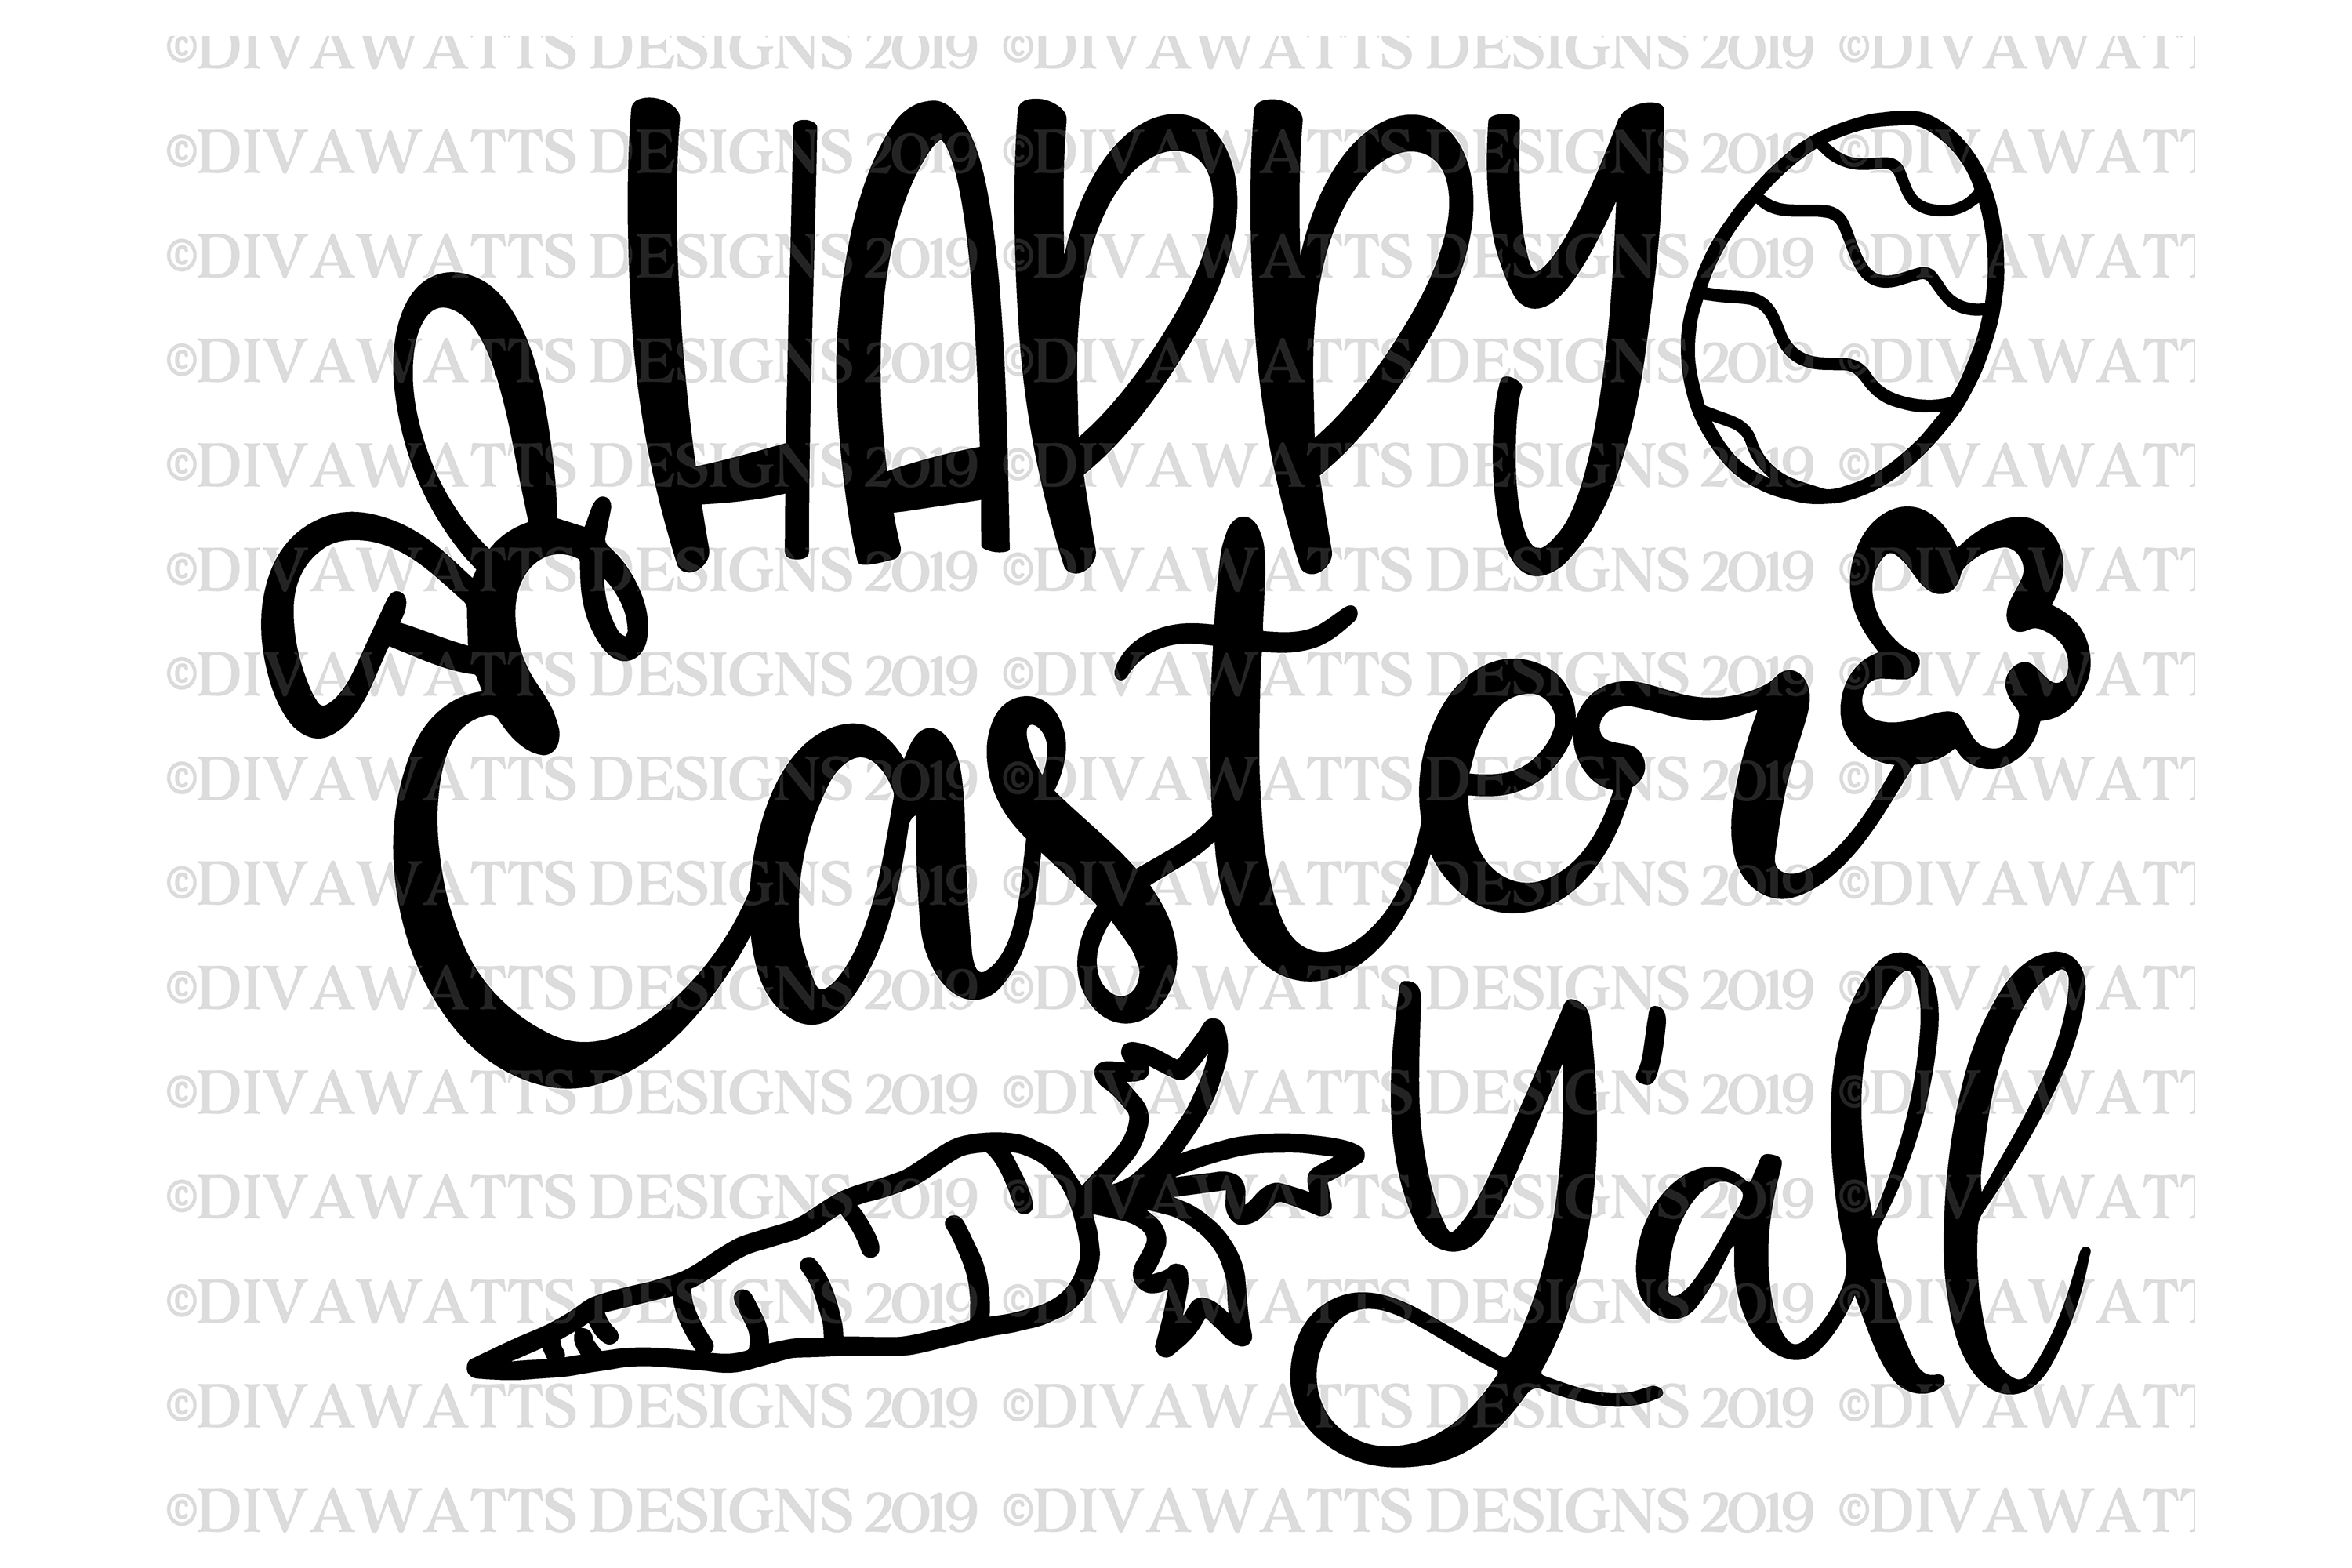 Download Happy Easter Y'all - Bunny Ears Tail Egg Carrot - SVG PNG